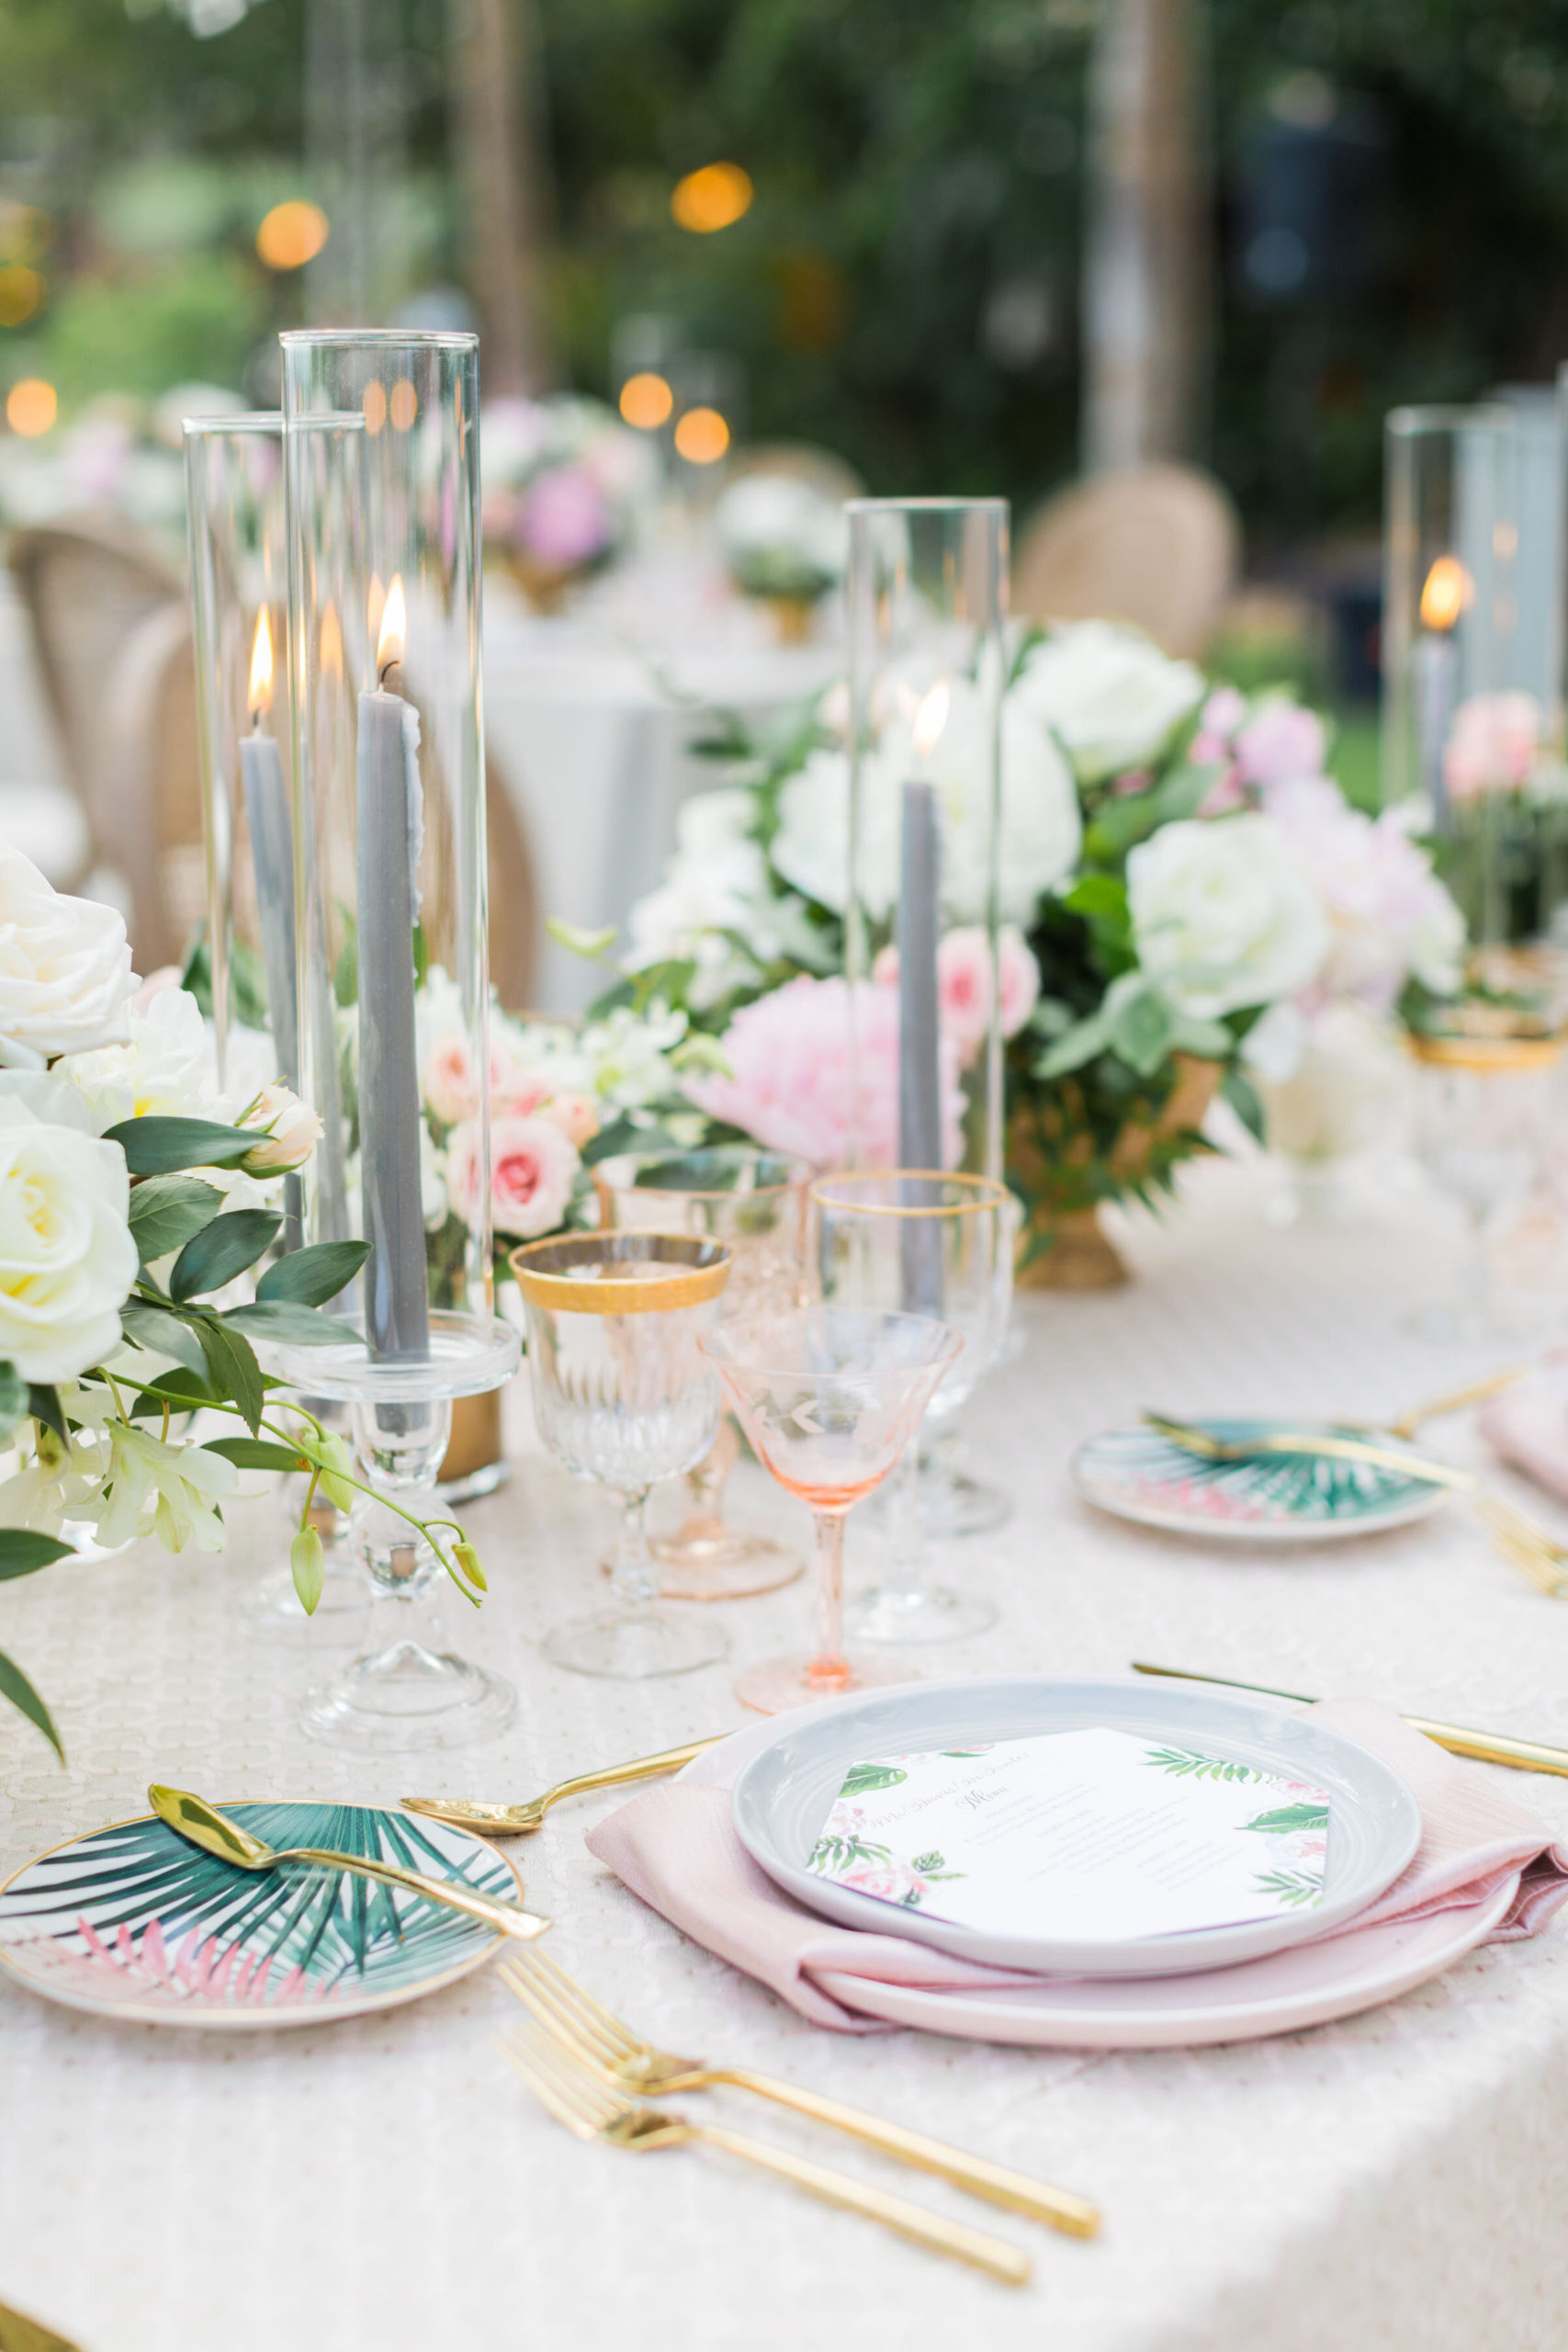 Tablescape Inspiration - Please ignore the palm plate (Too tropical)